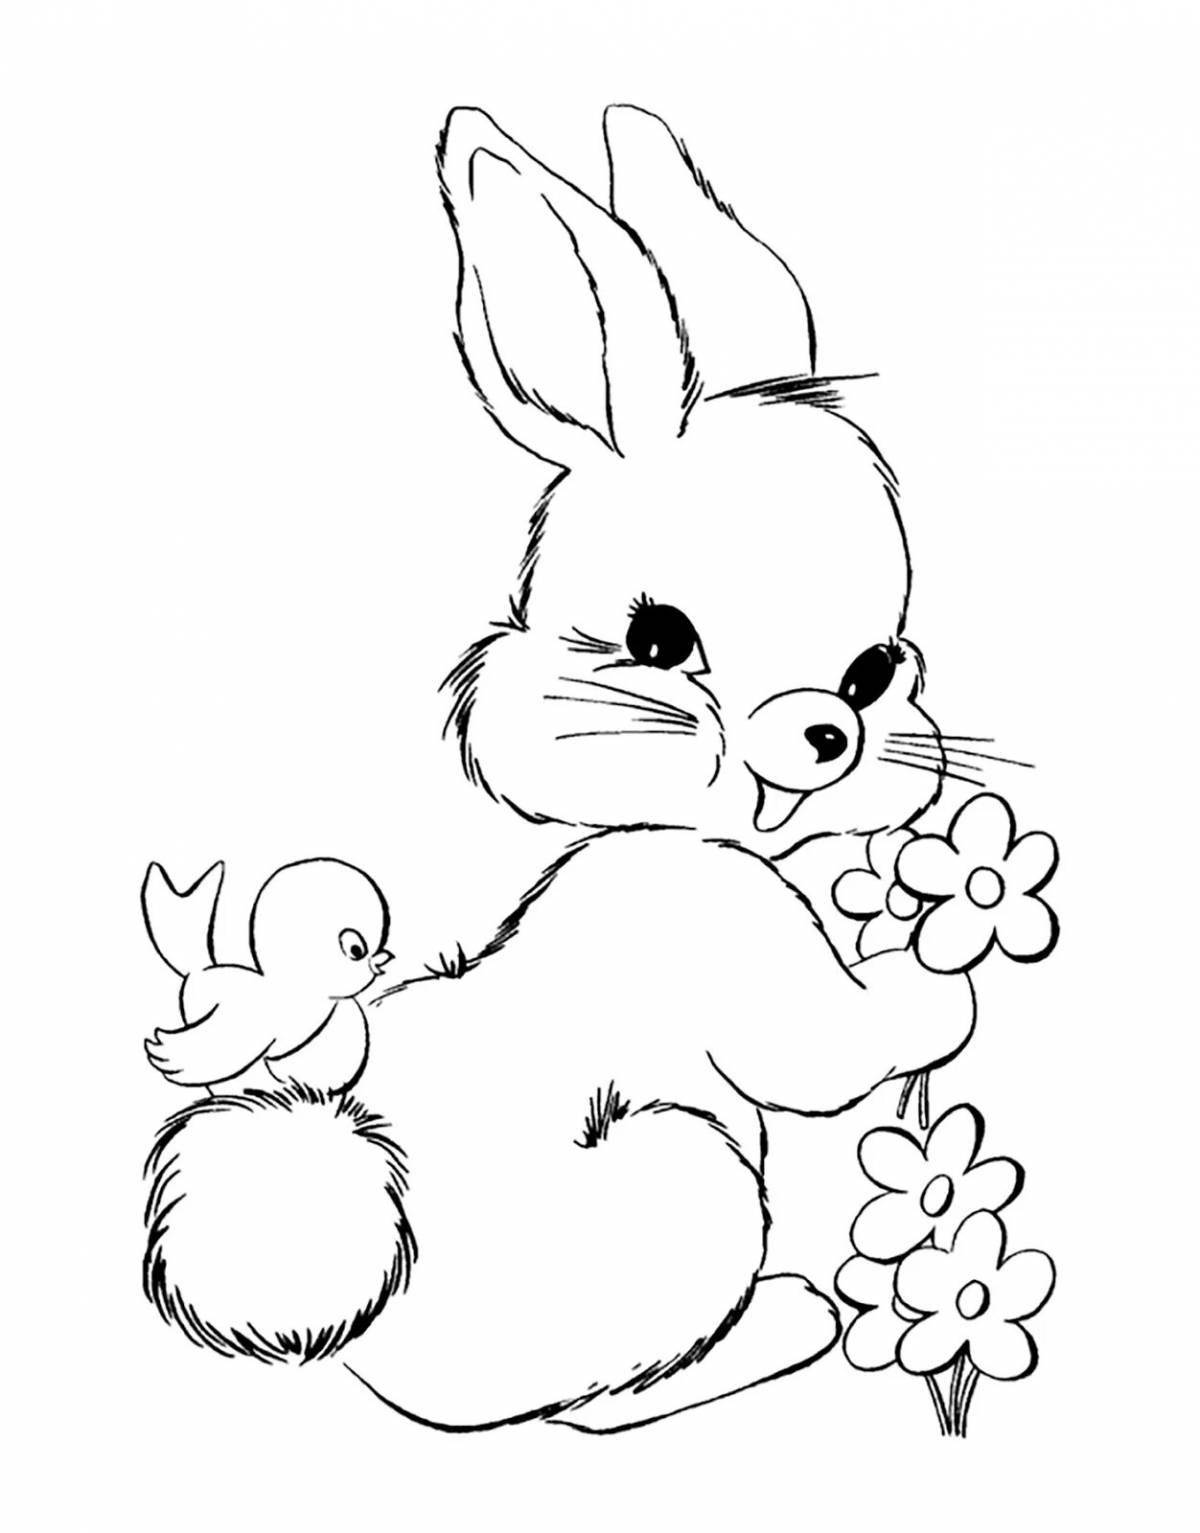 Funny bunny drawing for kids